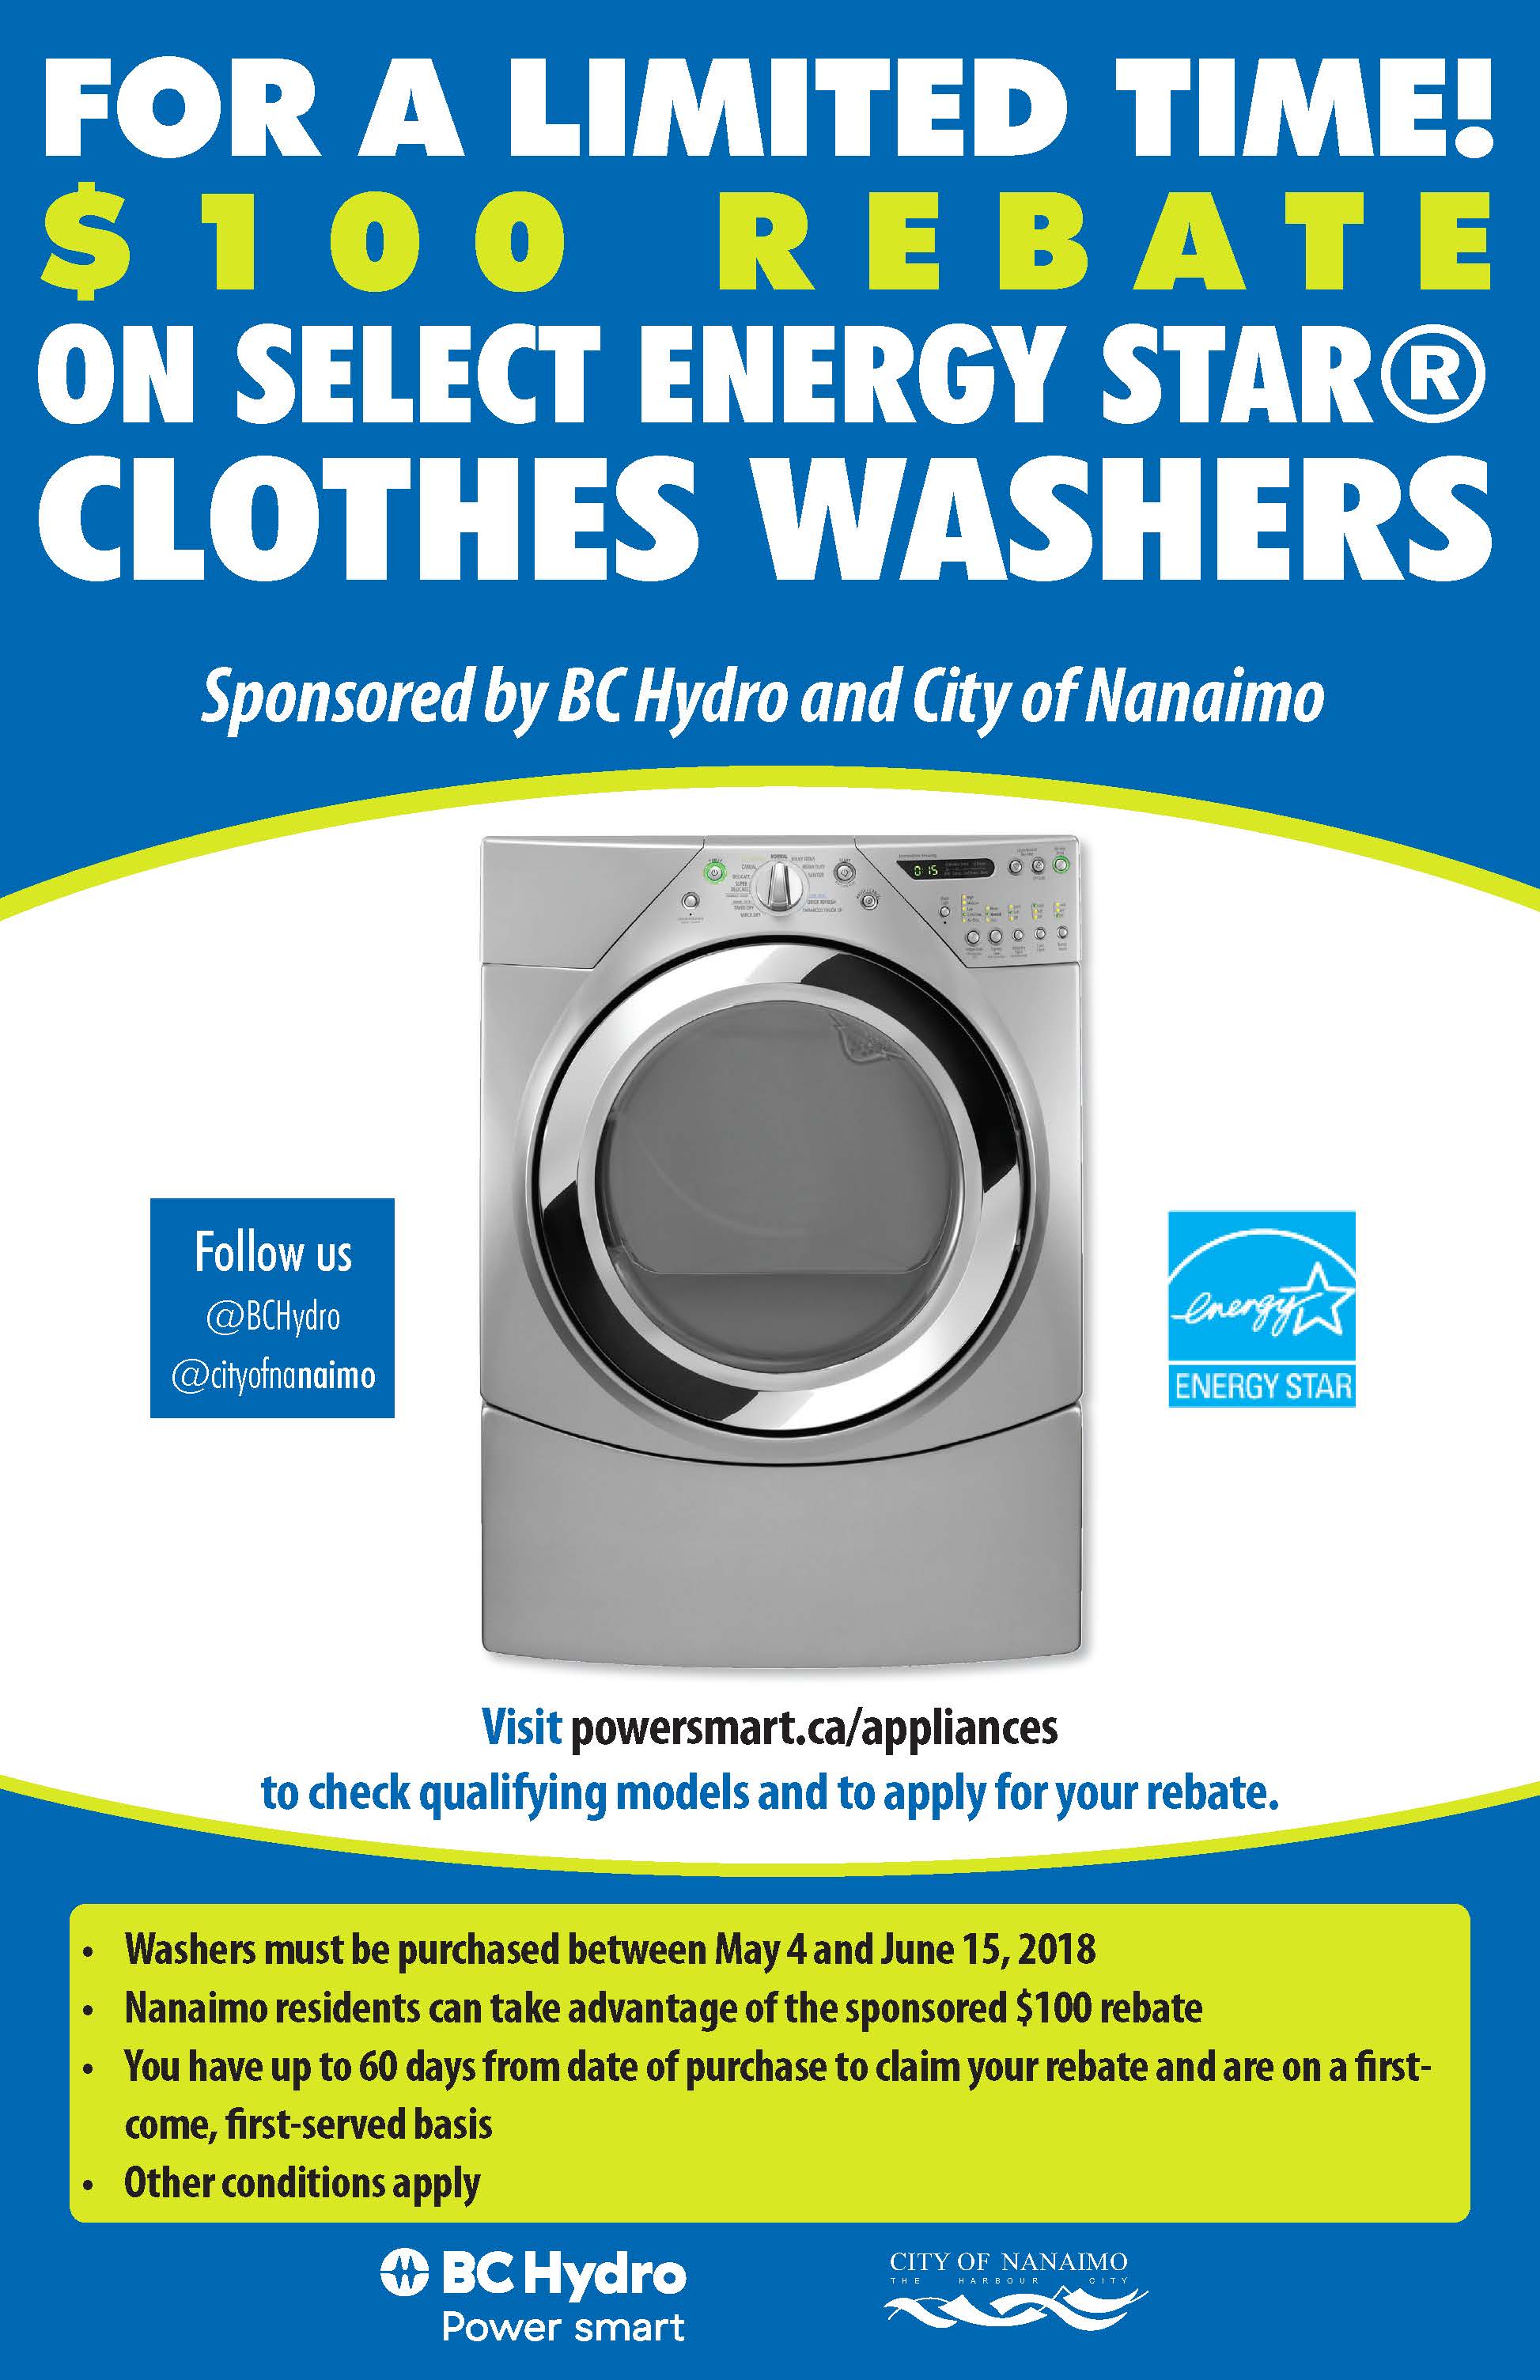 clothes-washer-rebate-program-new-rebates-available